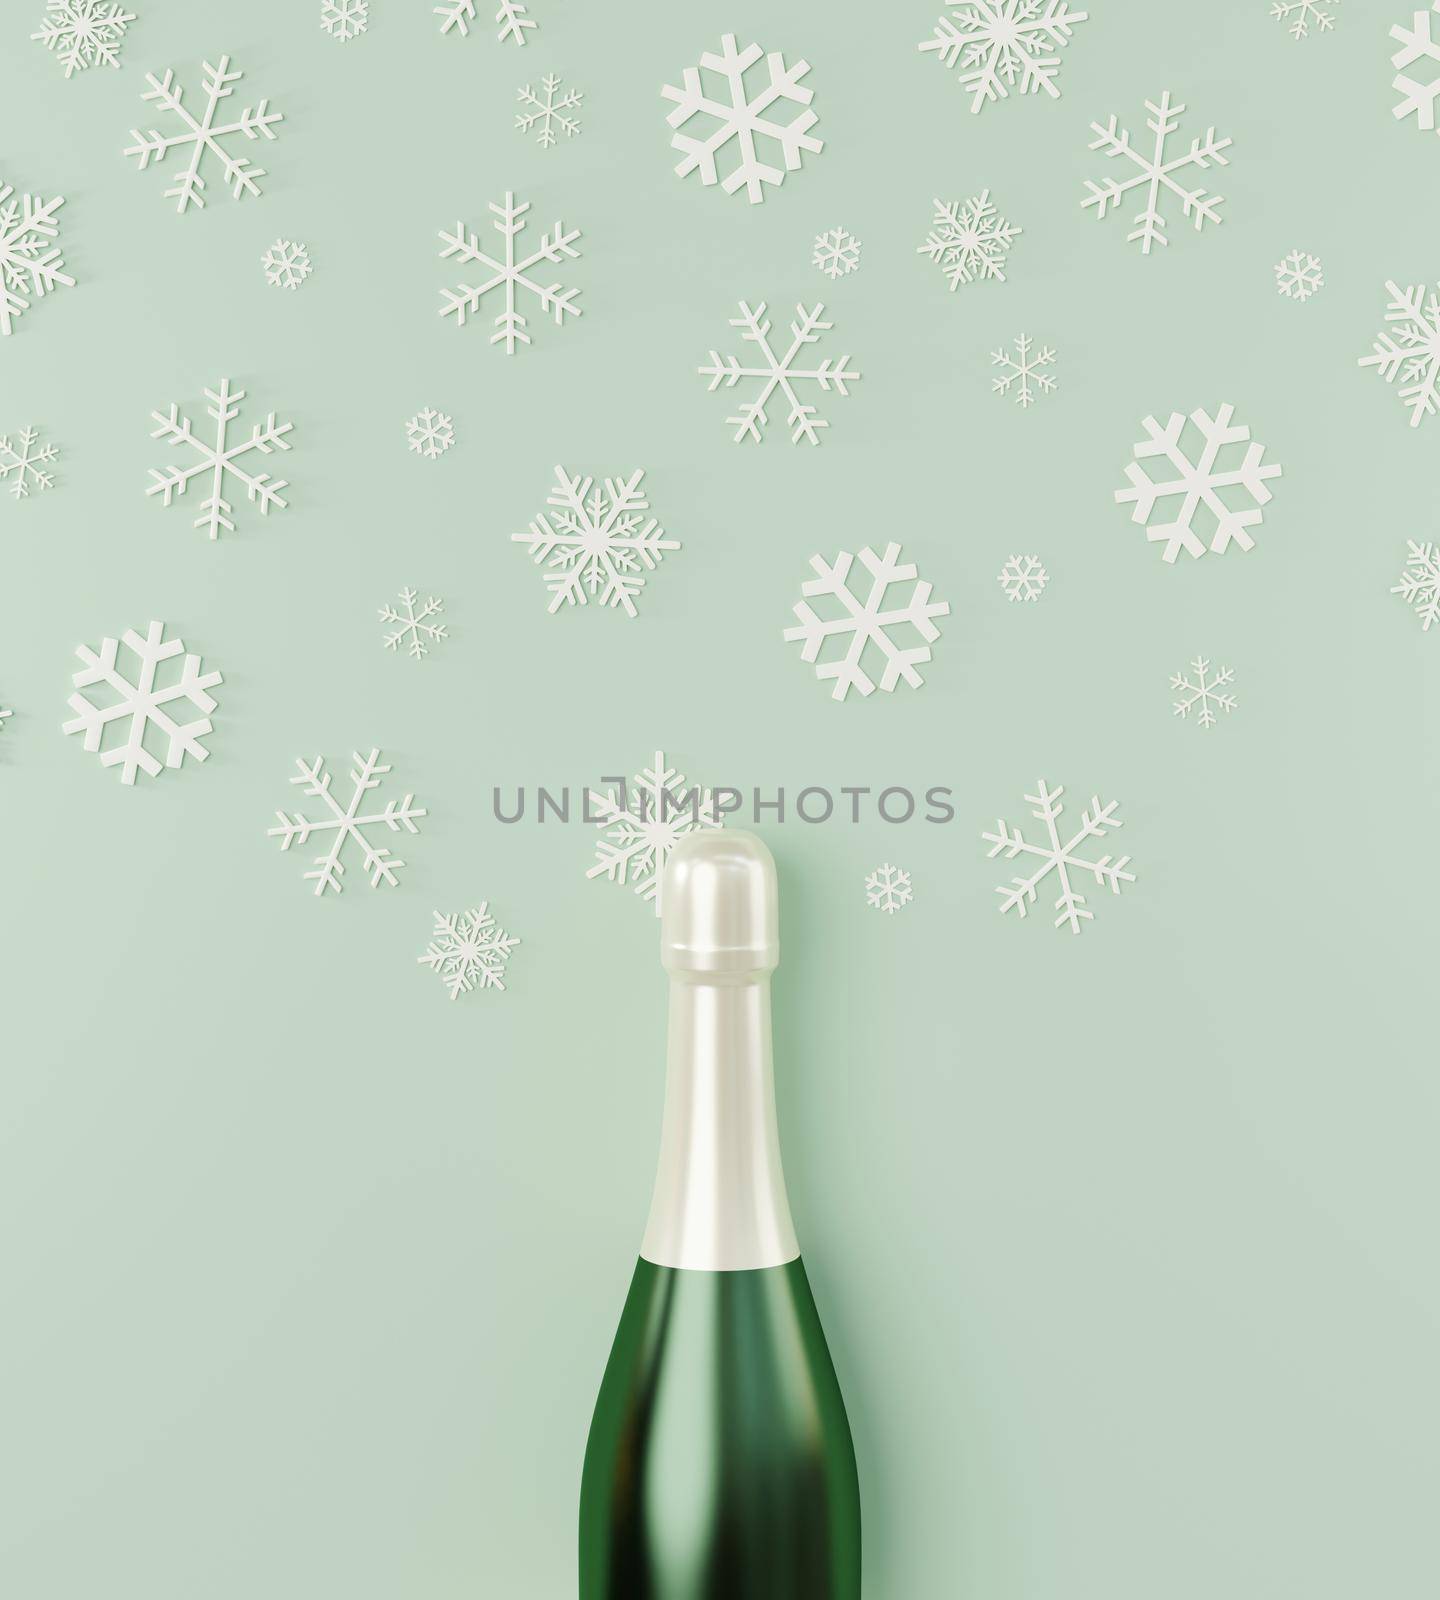 Merry Christmas and Happy New Year, Champagne bottle with white snowflakes by Sorapop